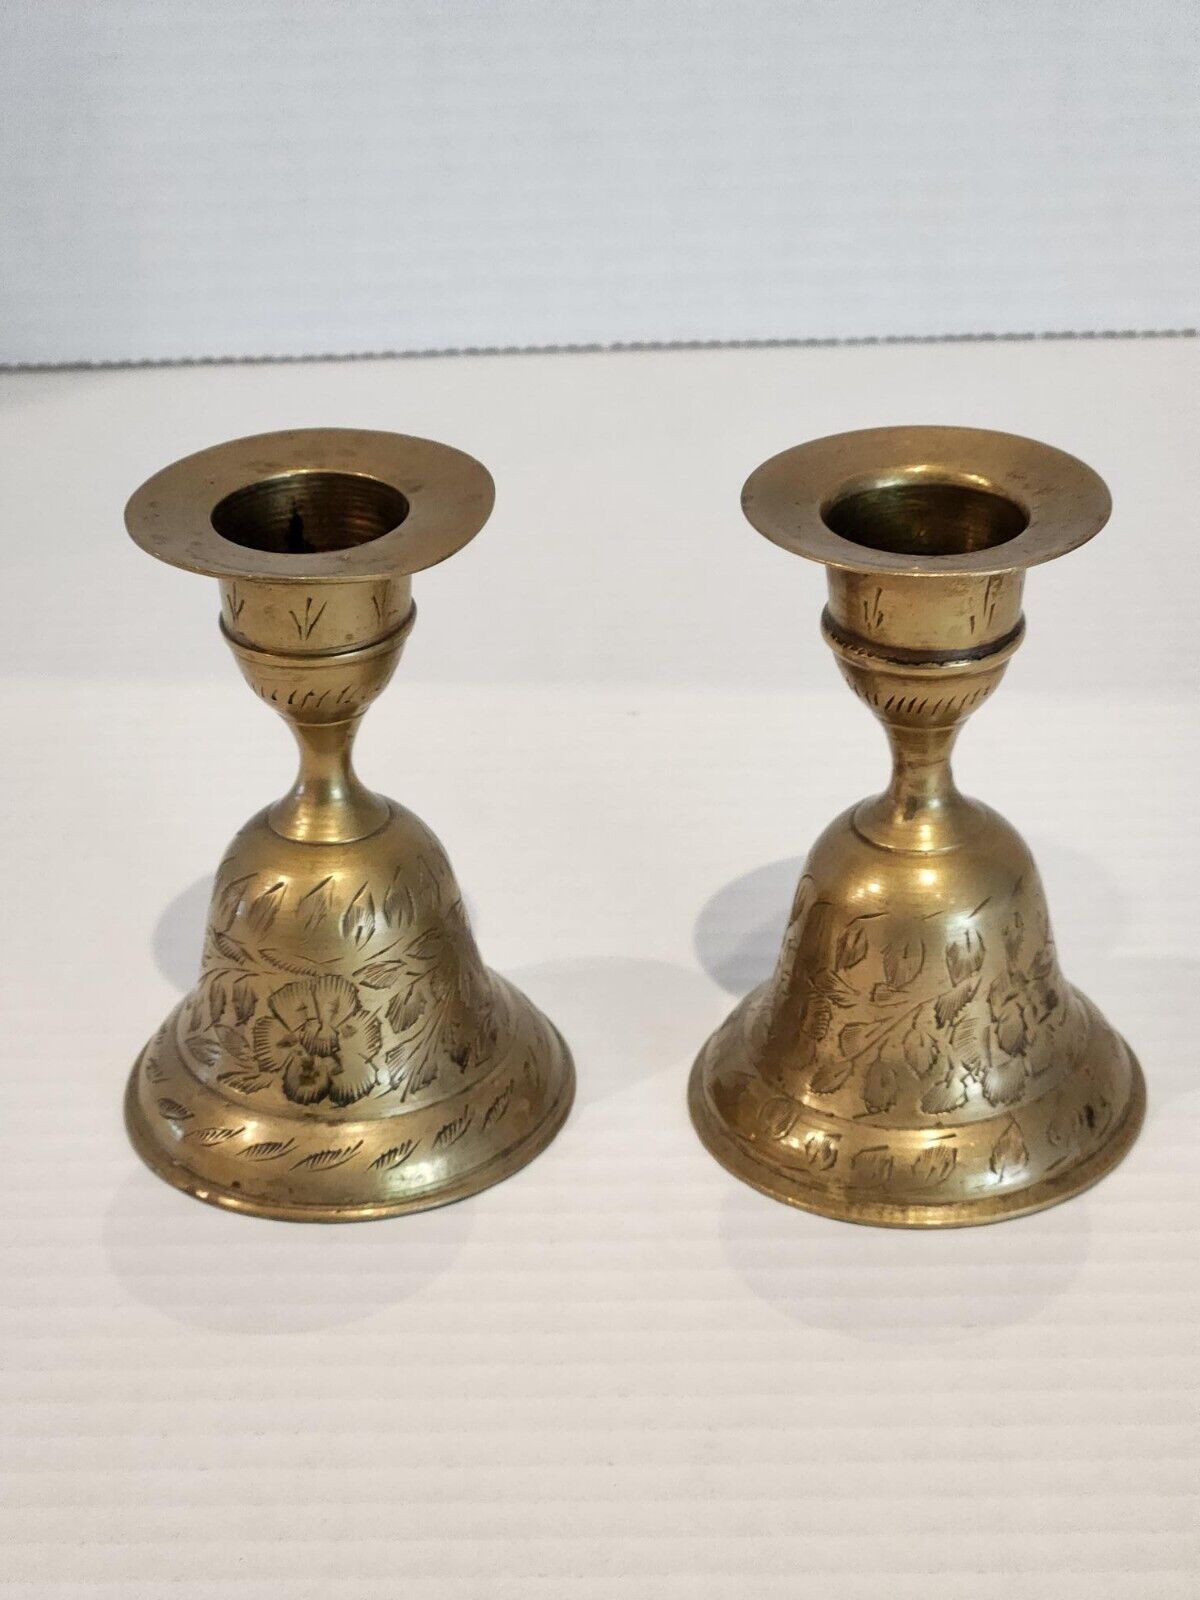 Vintage Brass Bell Ornate With Candle Holder Made in India, Set of 2